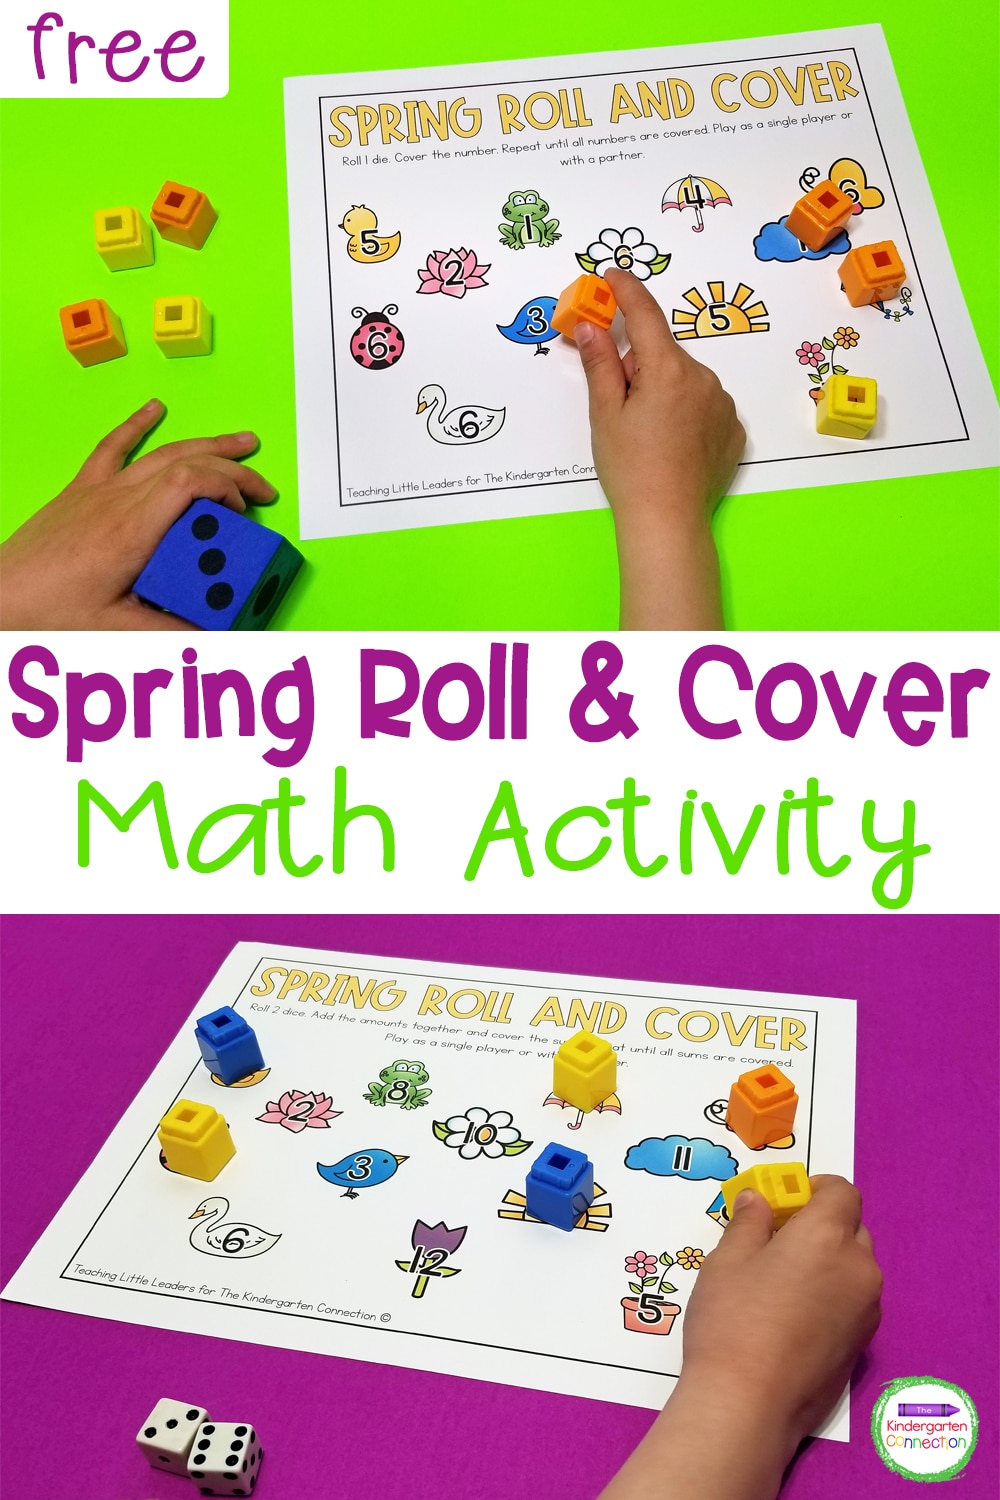 This FREE printable Spring Roll and Cover Math Activity can be played in 2 different ways! Practice both number identification and addition!